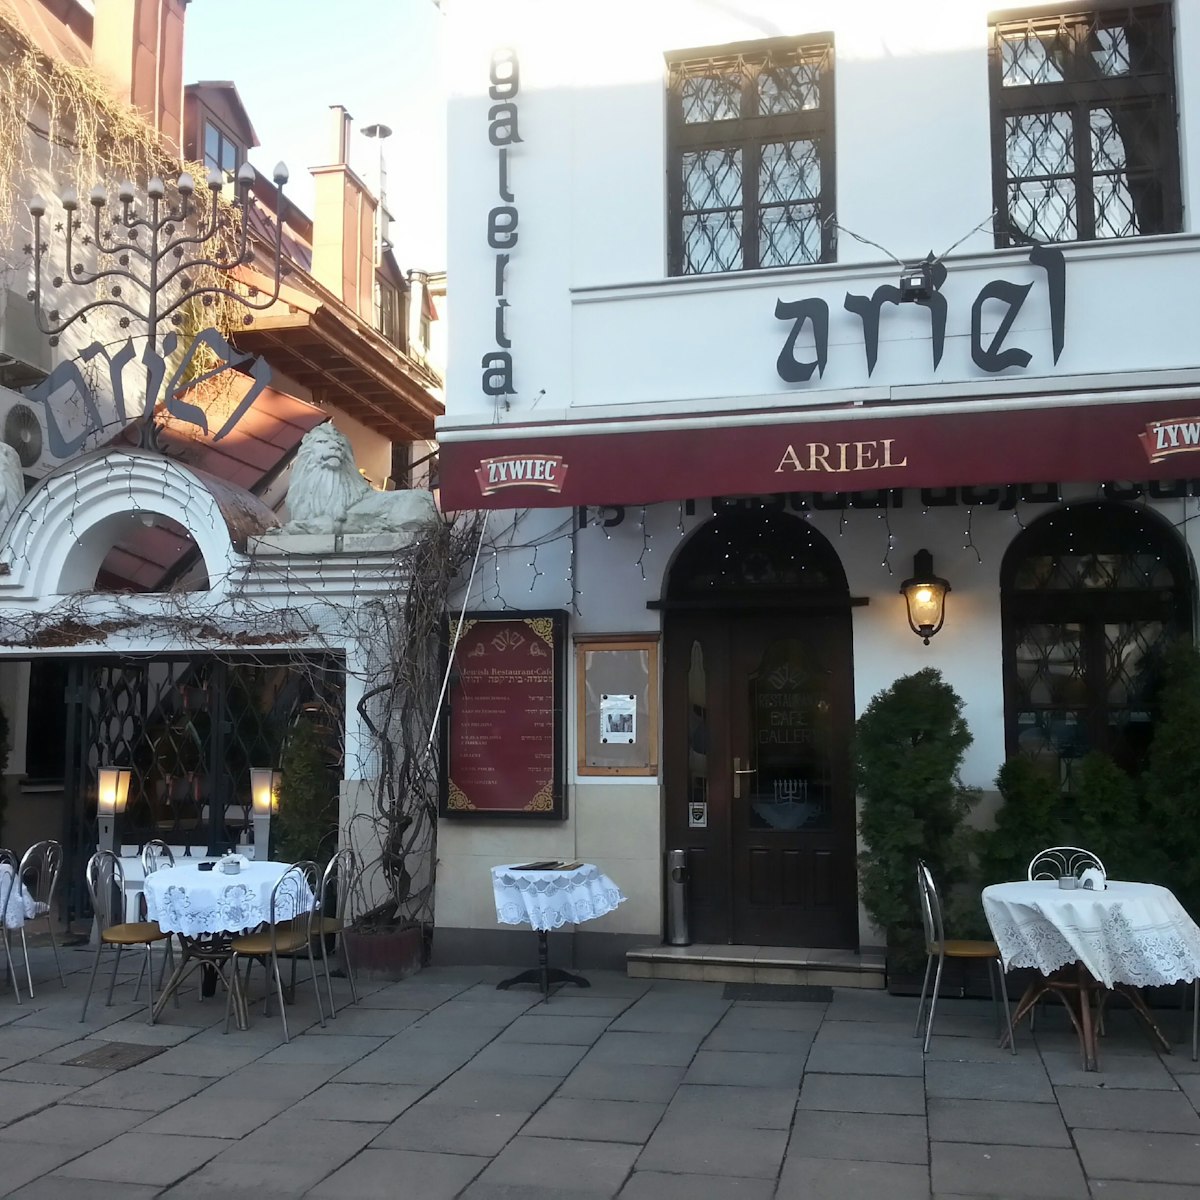 Ariel, the restaurant sits in the Jewish Square and is popular with tourists